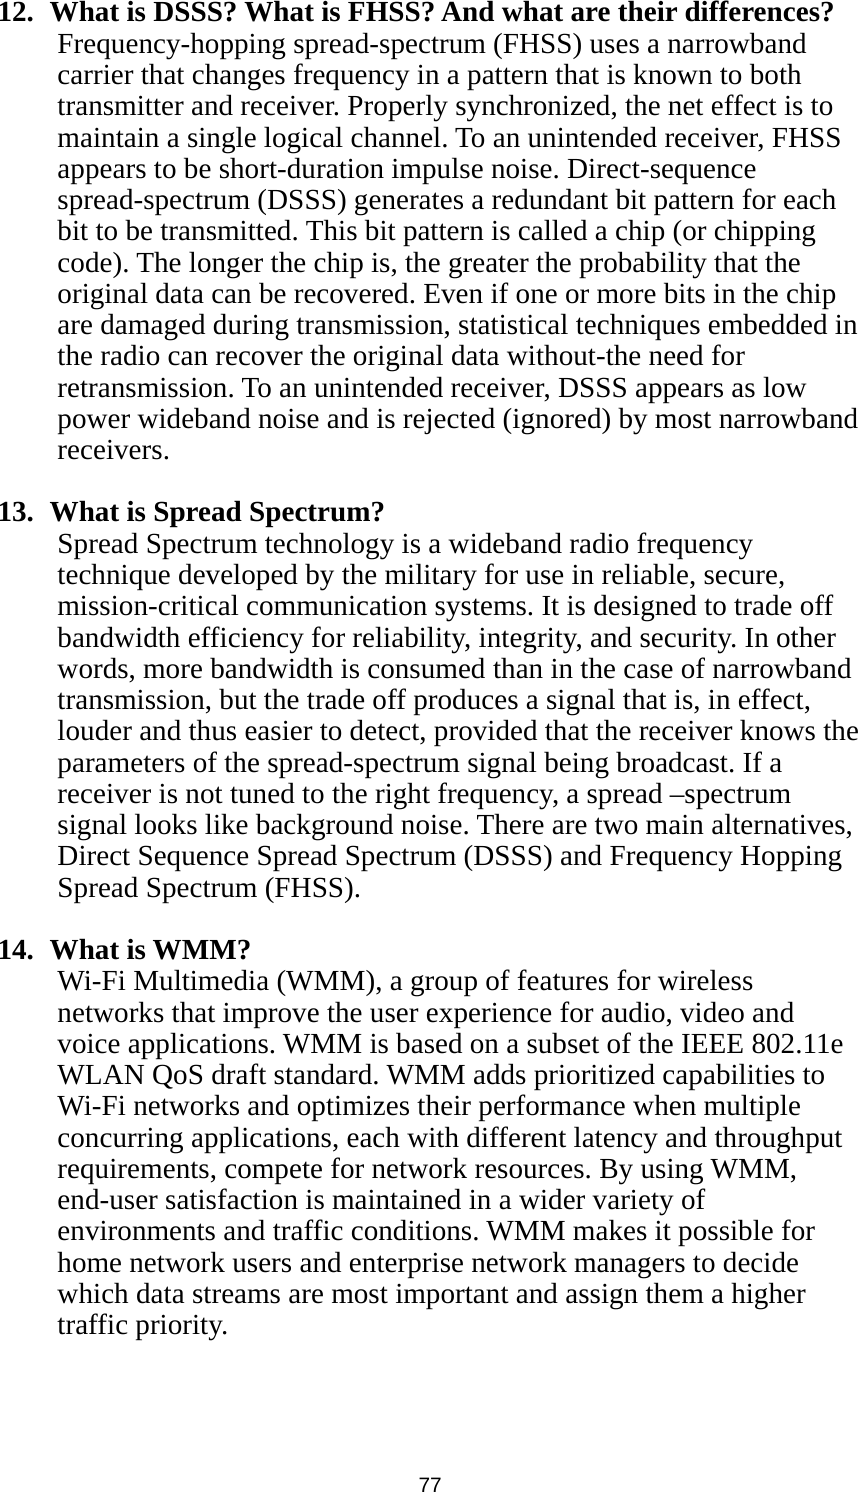  77 12.   What is DSSS? What is FHSS? And what are their differences? Frequency-hopping spread-spectrum (FHSS) uses a narrowband carrier that changes frequency in a pattern that is known to both transmitter and receiver. Properly synchronized, the net effect is to maintain a single logical channel. To an unintended receiver, FHSS appears to be short-duration impulse noise. Direct-sequence spread-spectrum (DSSS) generates a redundant bit pattern for each bit to be transmitted. This bit pattern is called a chip (or chipping code). The longer the chip is, the greater the probability that the original data can be recovered. Even if one or more bits in the chip are damaged during transmission, statistical techniques embedded in the radio can recover the original data without-the need for retransmission. To an unintended receiver, DSSS appears as low power wideband noise and is rejected (ignored) by most narrowband receivers.  13.   What is Spread Spectrum? Spread Spectrum technology is a wideband radio frequency technique developed by the military for use in reliable, secure, mission-critical communication systems. It is designed to trade off bandwidth efficiency for reliability, integrity, and security. In other words, more bandwidth is consumed than in the case of narrowband transmission, but the trade off produces a signal that is, in effect, louder and thus easier to detect, provided that the receiver knows the parameters of the spread-spectrum signal being broadcast. If a receiver is not tuned to the right frequency, a spread –spectrum signal looks like background noise. There are two main alternatives, Direct Sequence Spread Spectrum (DSSS) and Frequency Hopping Spread Spectrum (FHSS).  14.  What is WMM? Wi-Fi Multimedia (WMM), a group of features for wireless networks that improve the user experience for audio, video and voice applications. WMM is based on a subset of the IEEE 802.11e WLAN QoS draft standard. WMM adds prioritized capabilities to Wi-Fi networks and optimizes their performance when multiple concurring applications, each with different latency and throughput requirements, compete for network resources. By using WMM, end-user satisfaction is maintained in a wider variety of environments and traffic conditions. WMM makes it possible for home network users and enterprise network managers to decide which data streams are most important and assign them a higher traffic priority.    